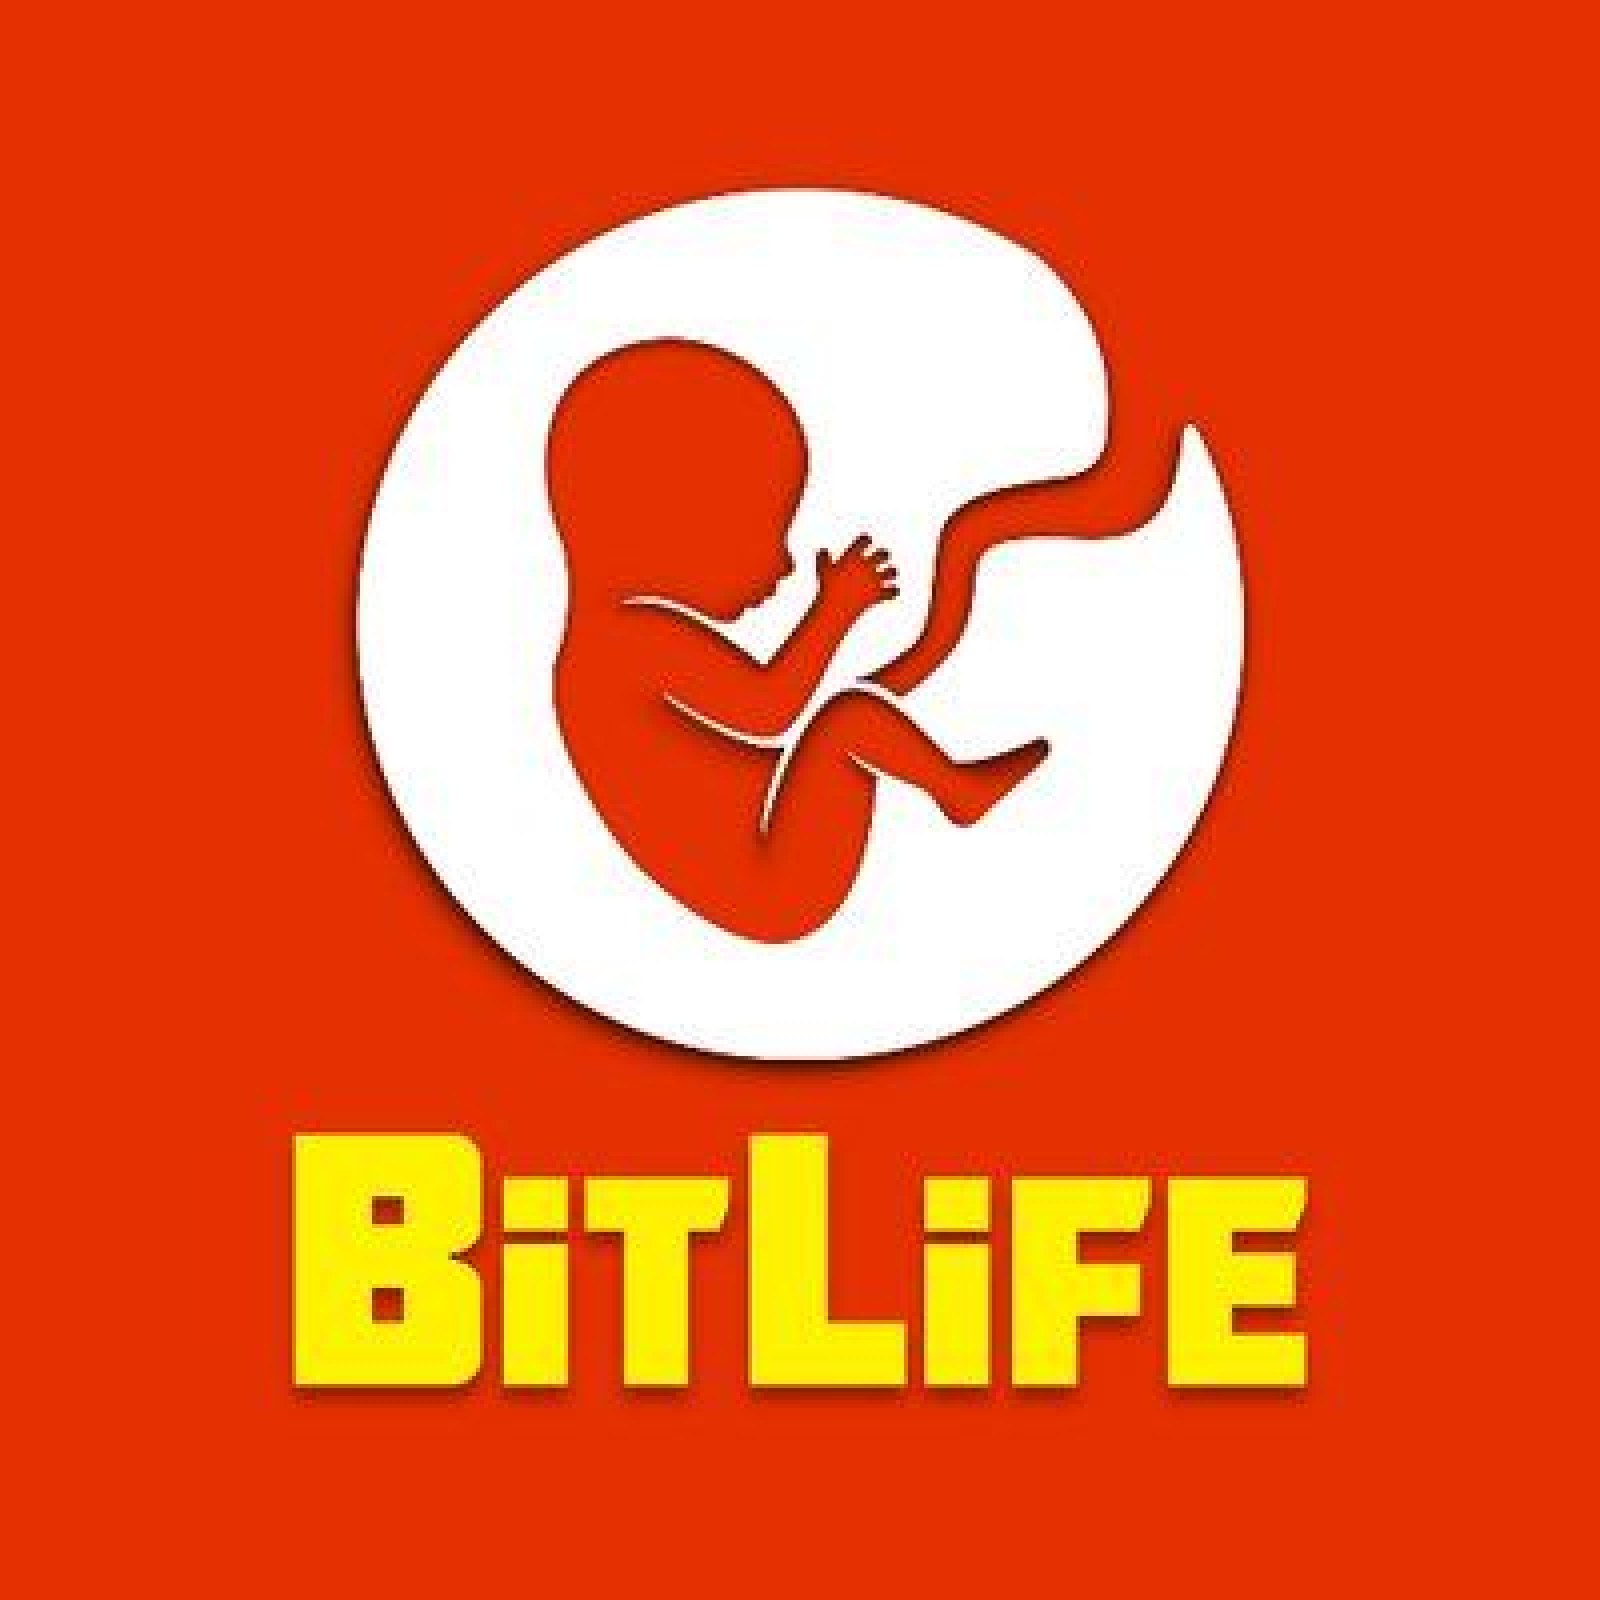 This escaping prison is ACTUALLY unbeatable : r/bitlife